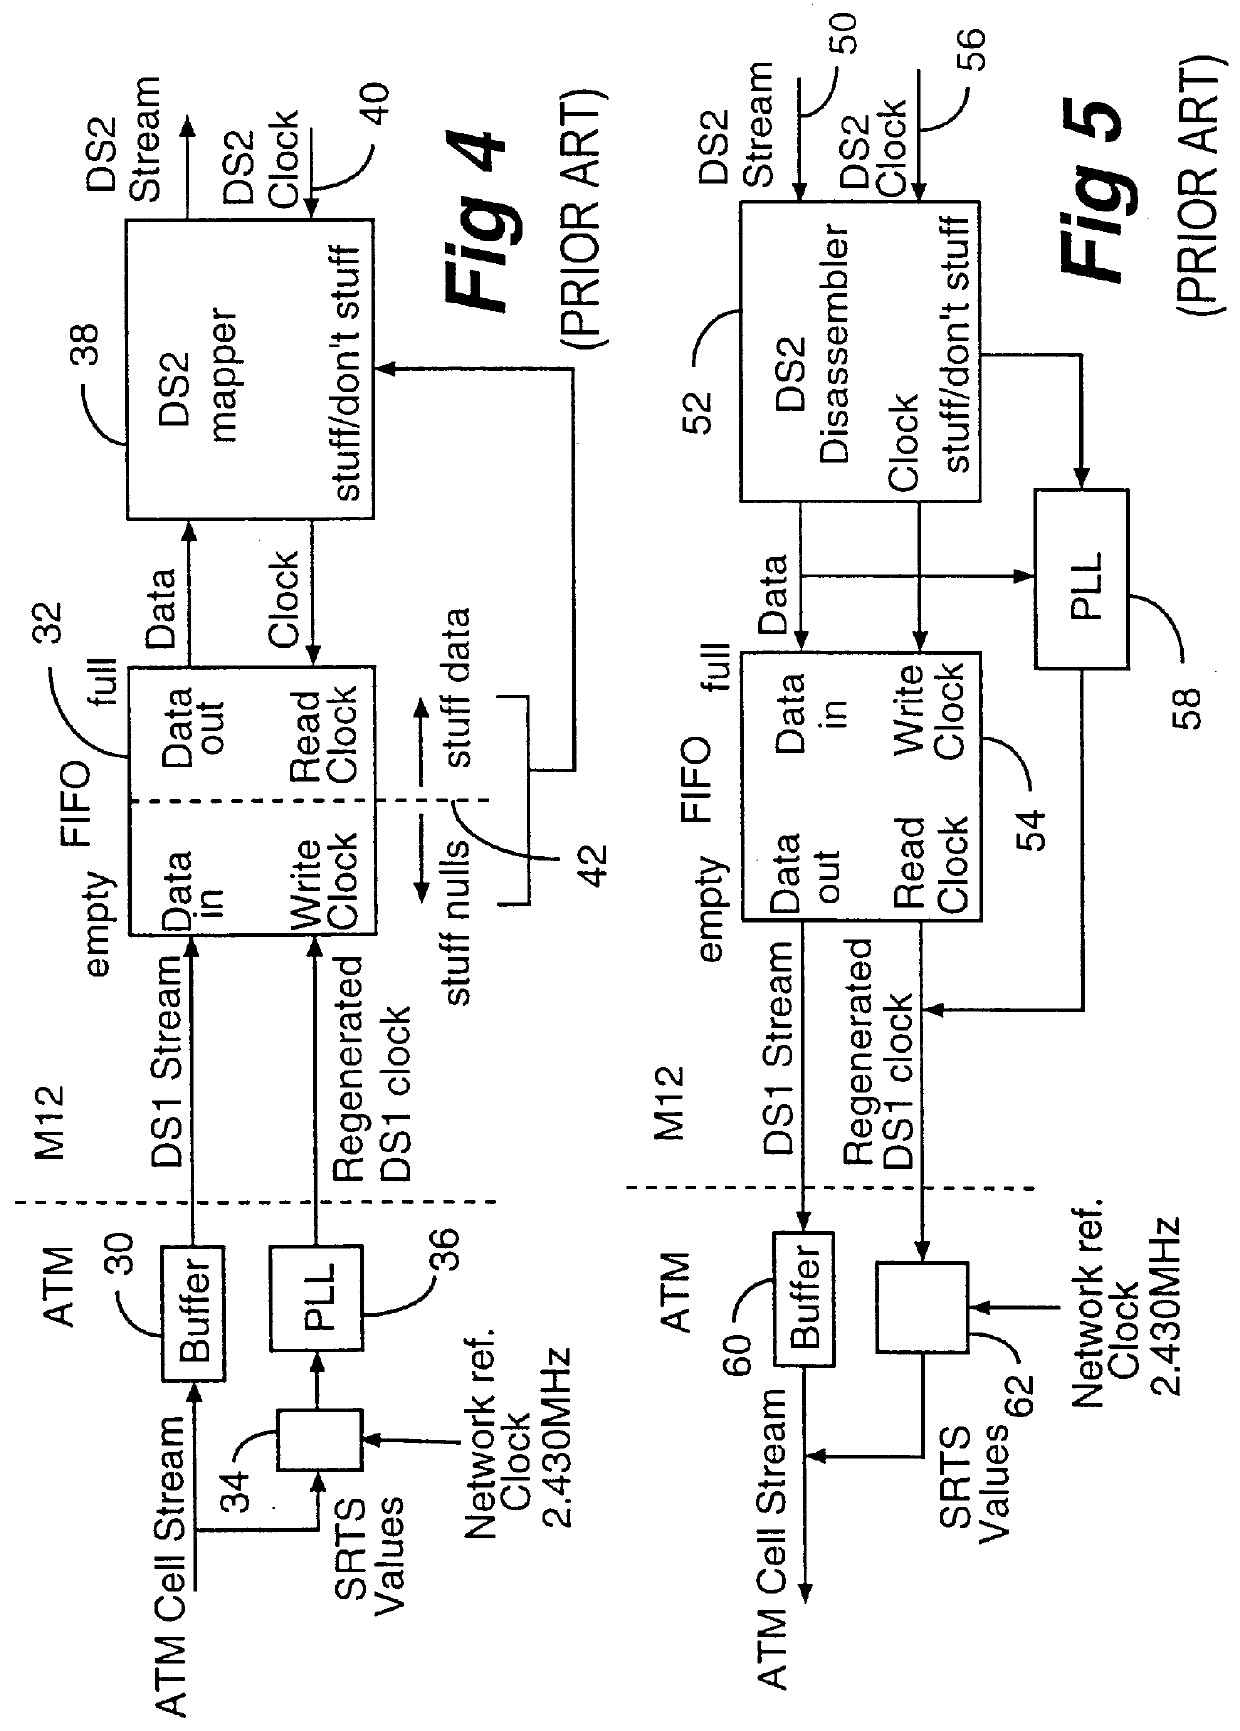 Method of and apparatus for multiplexing and demultiplexing digital signal streams